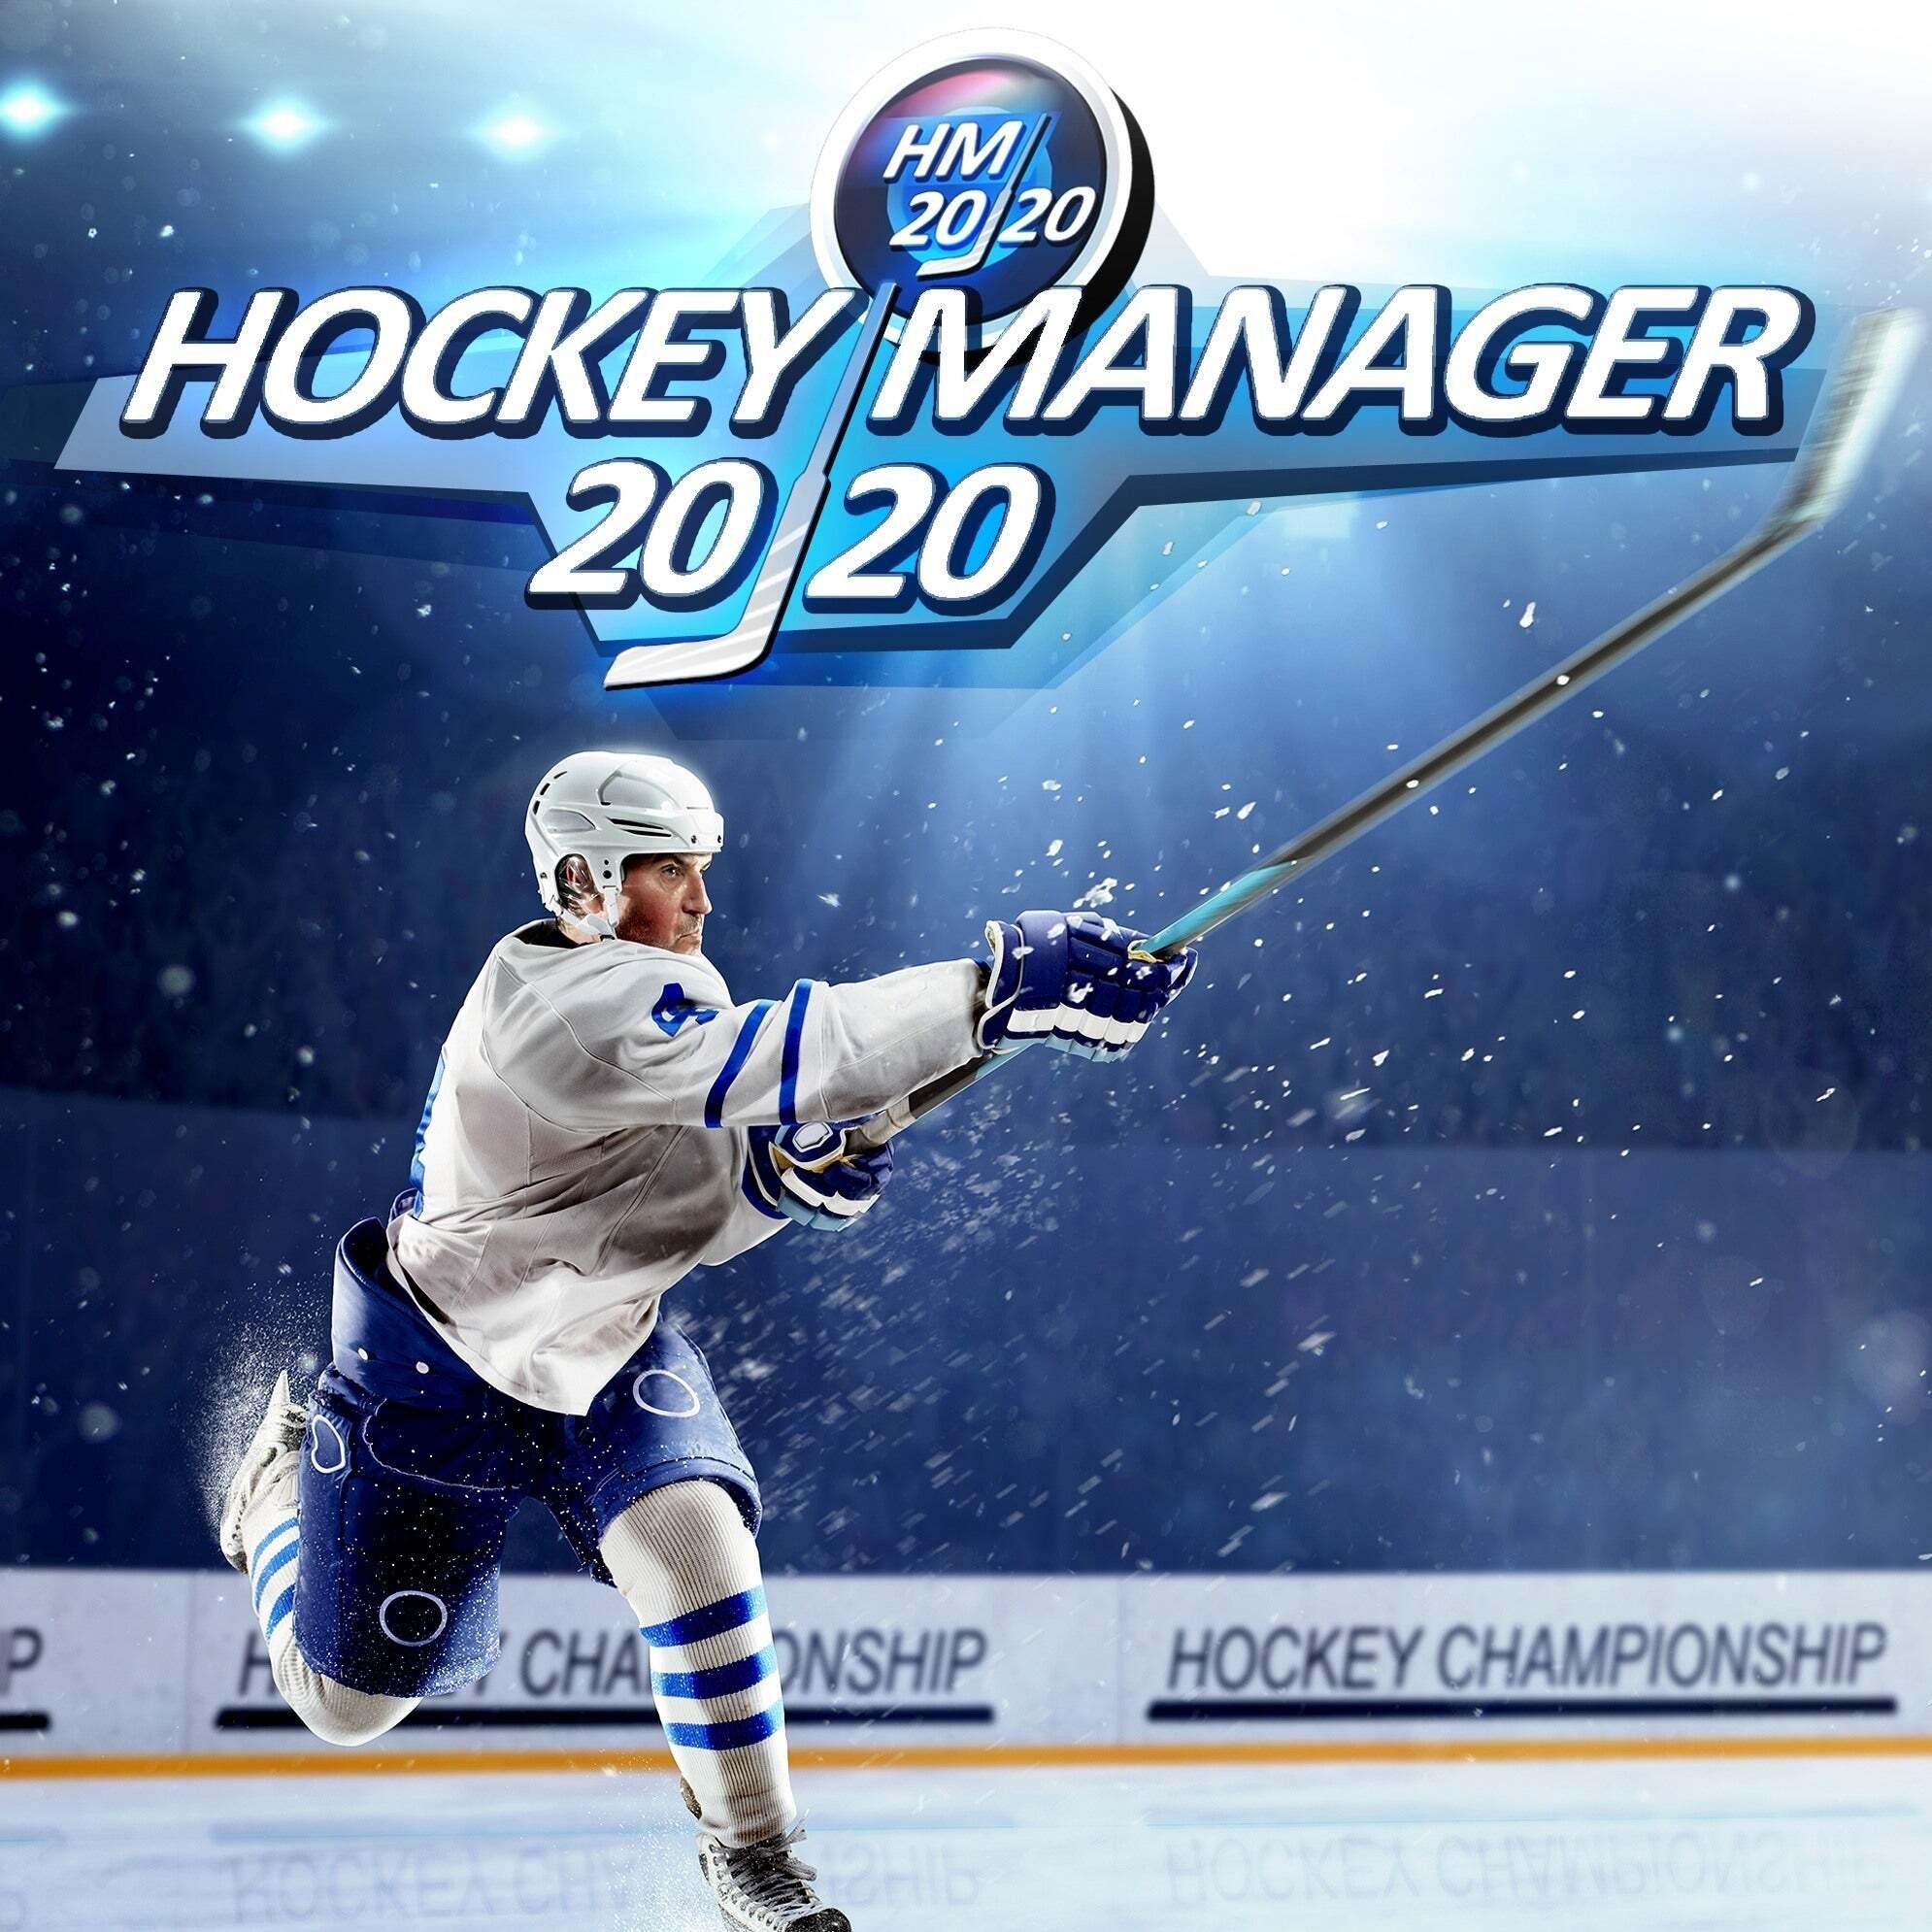 hockey manager game online